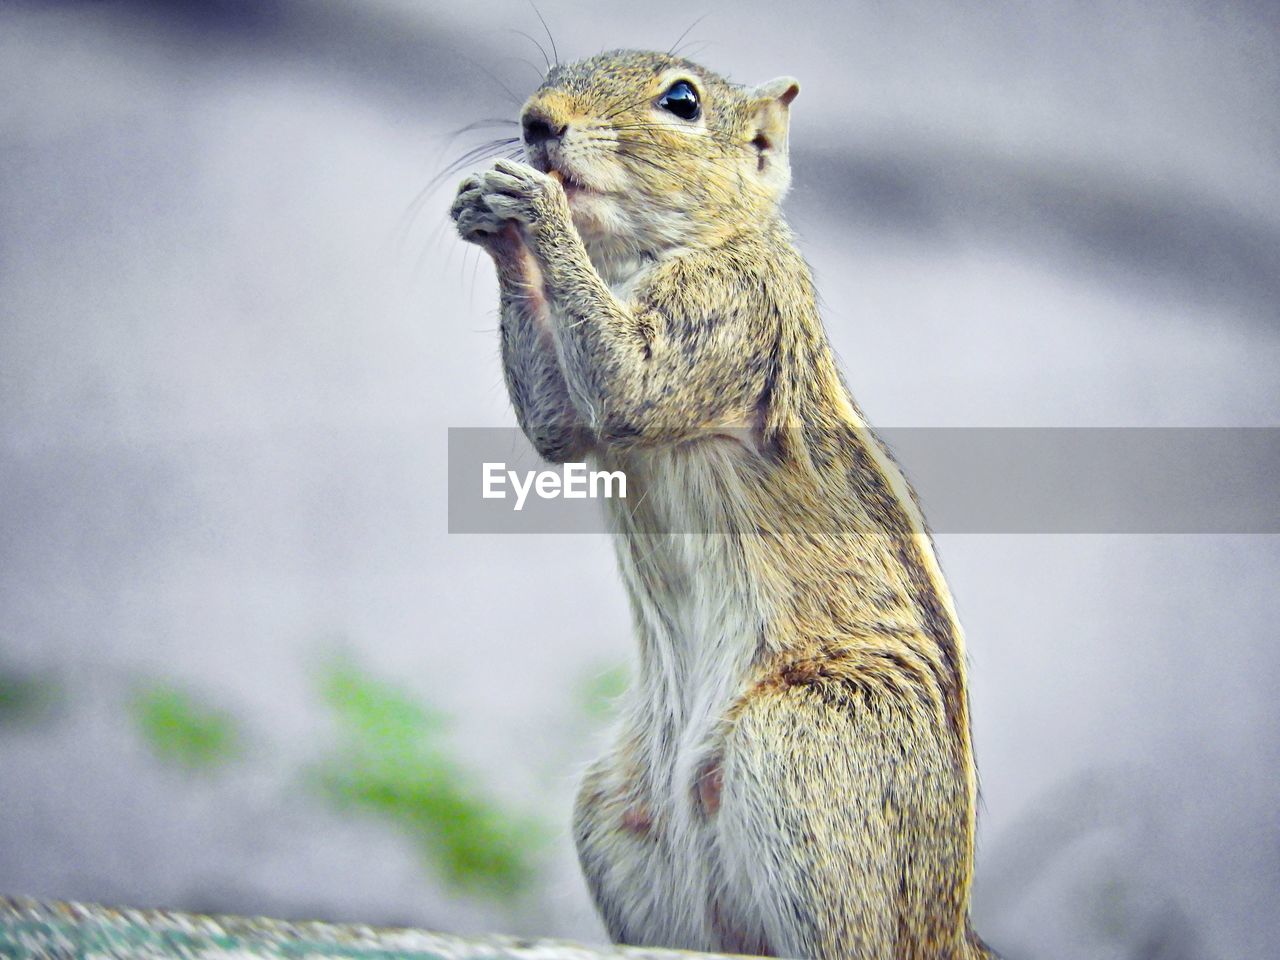 CLOSE-UP OF SQUIRREL ON BRANCH